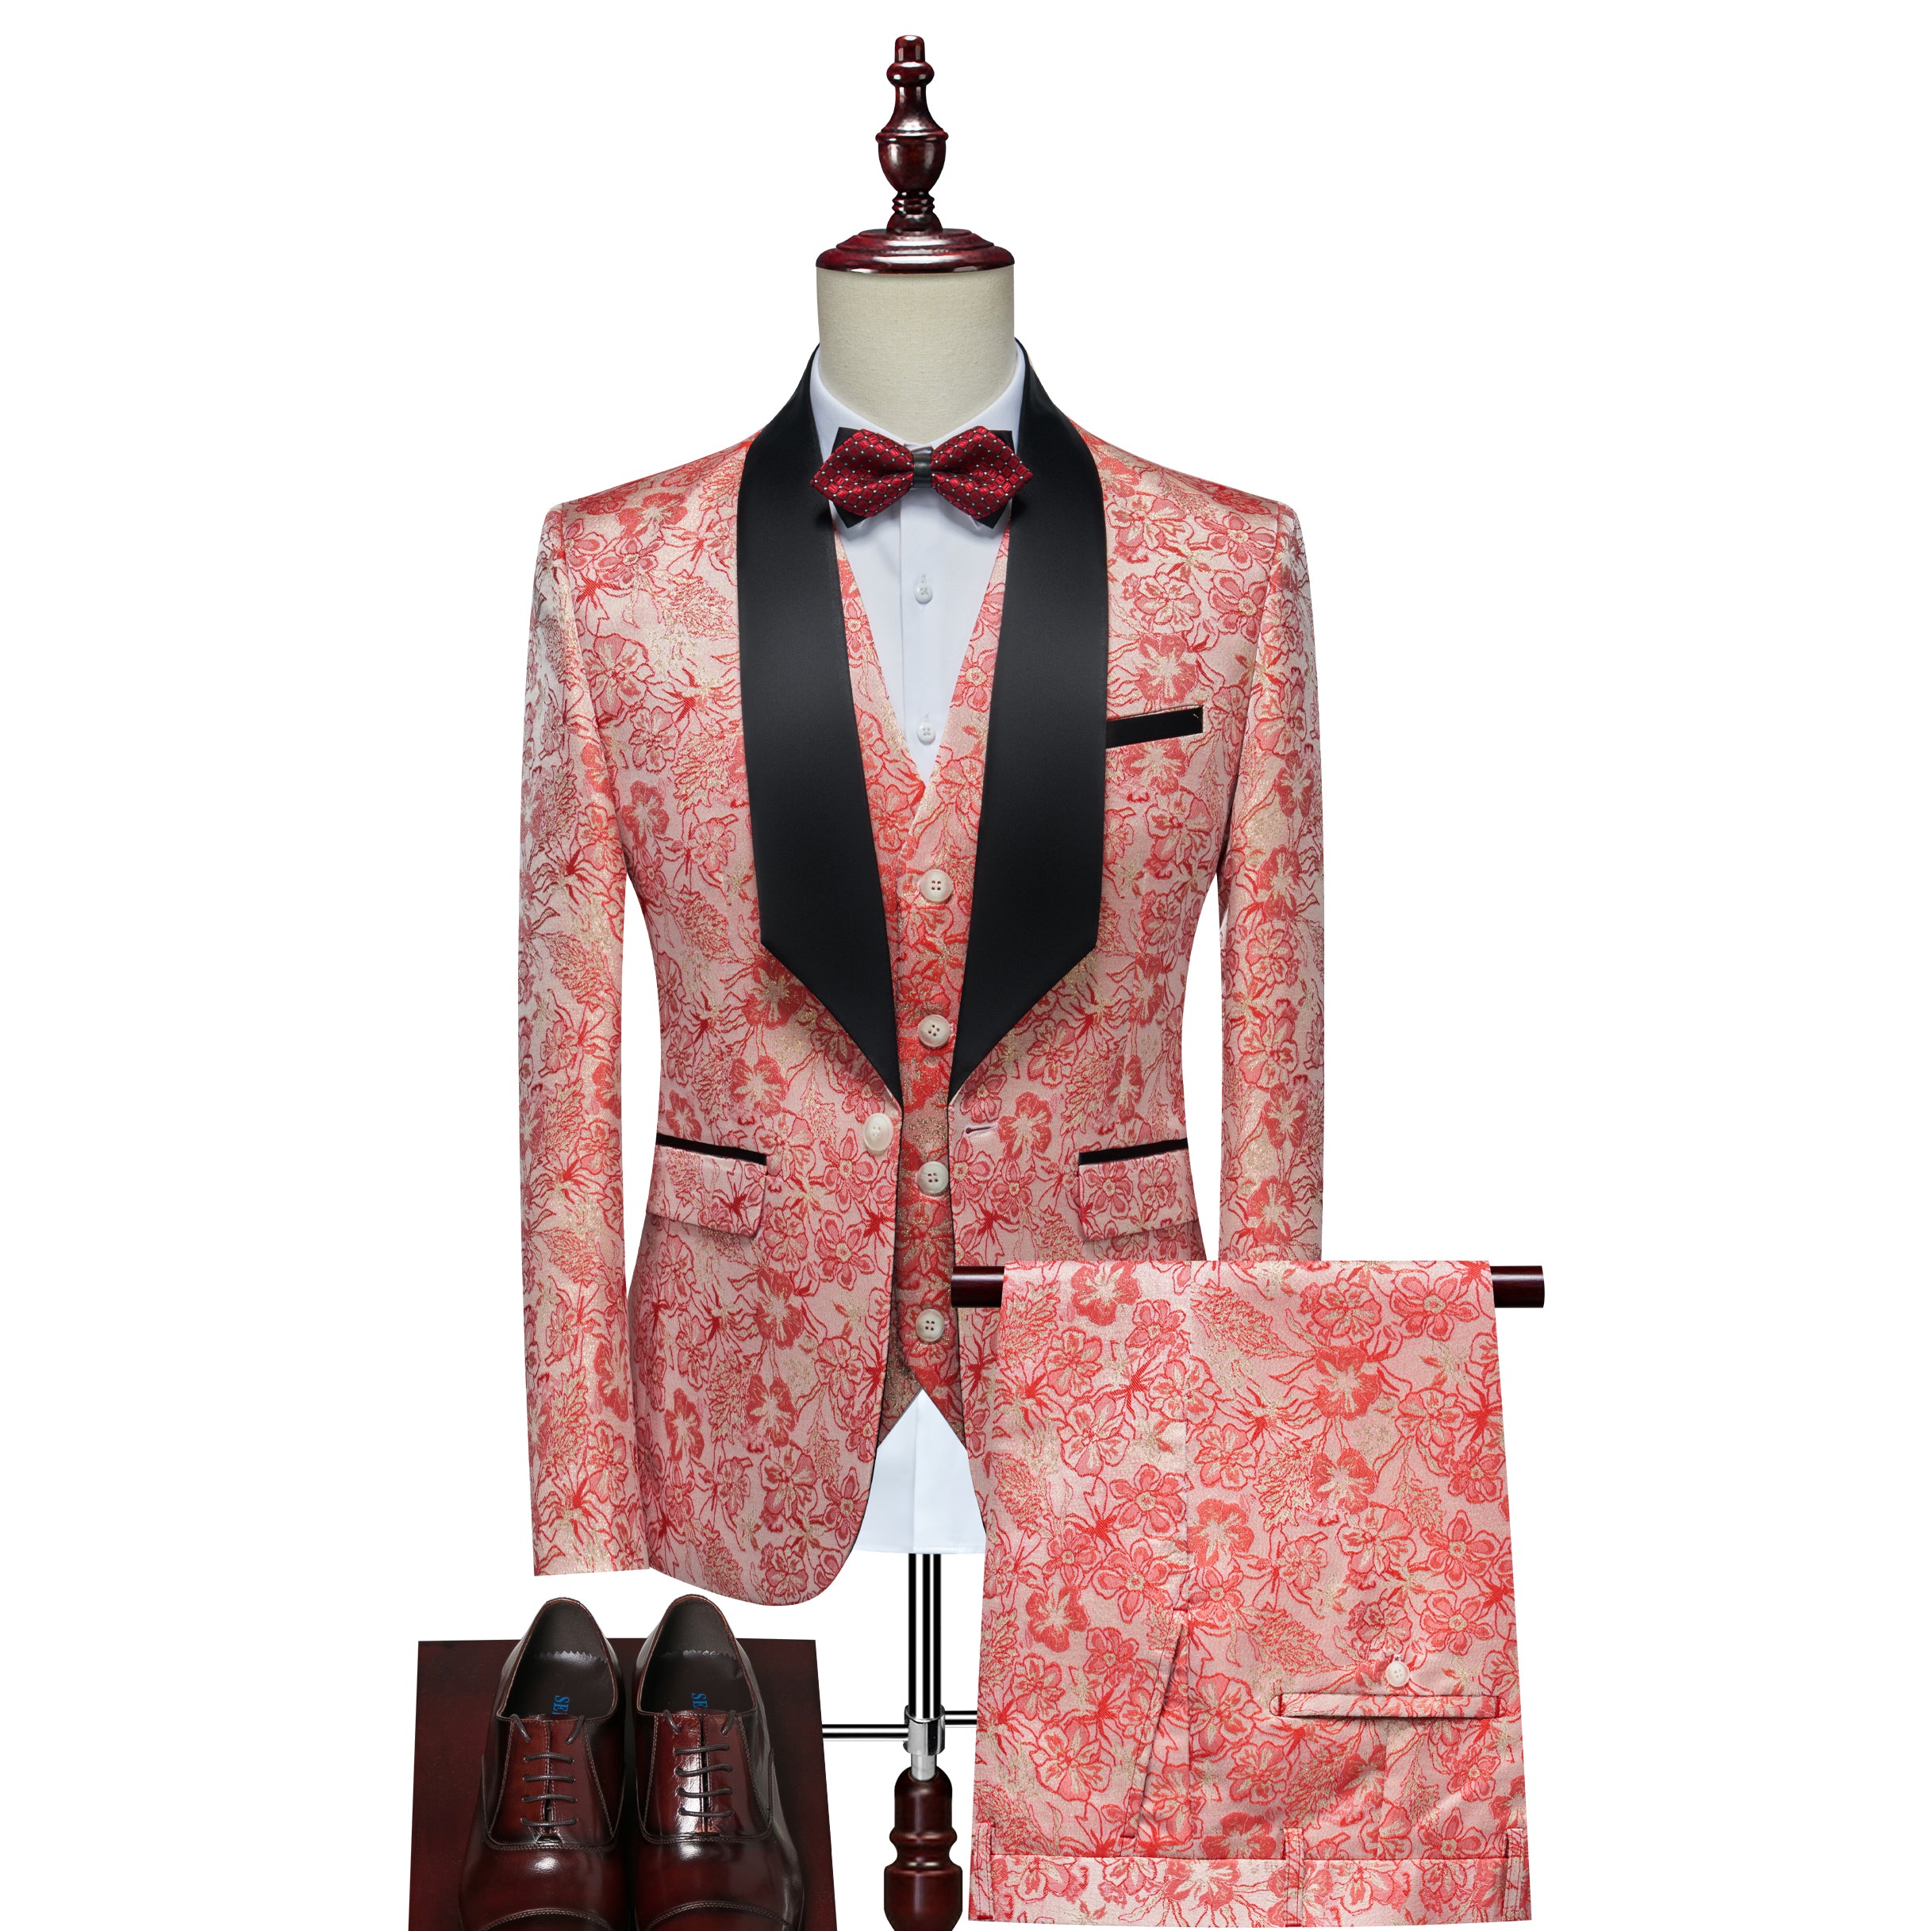 Men's 3 Piece Casual Floral Printed Tuxedos For Prom